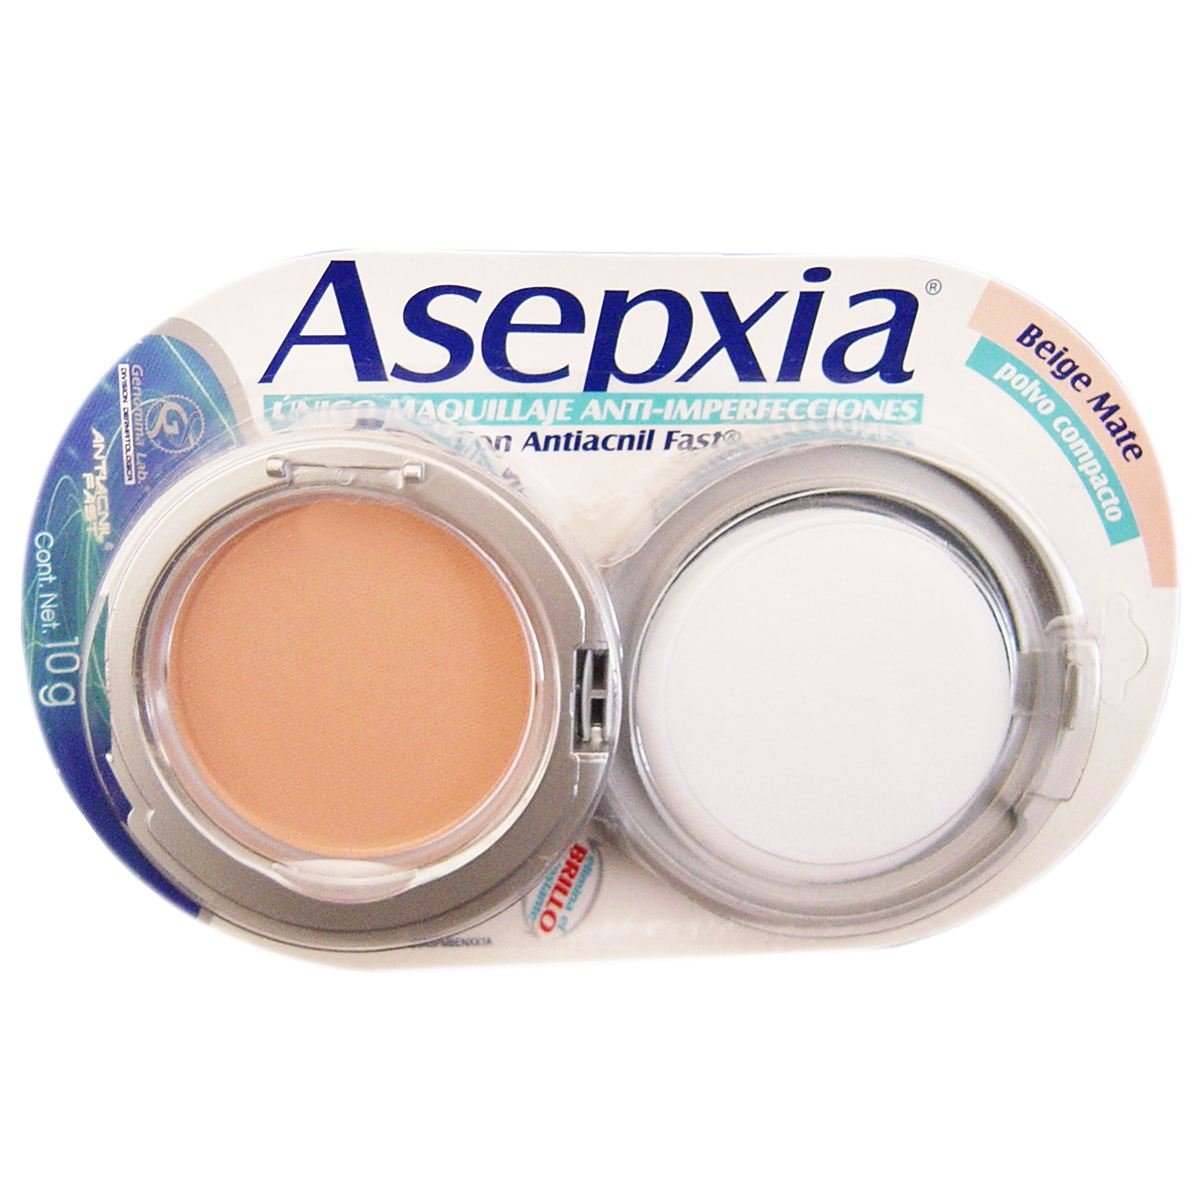 Asepxia Maquillaje Polvo Beige Mate